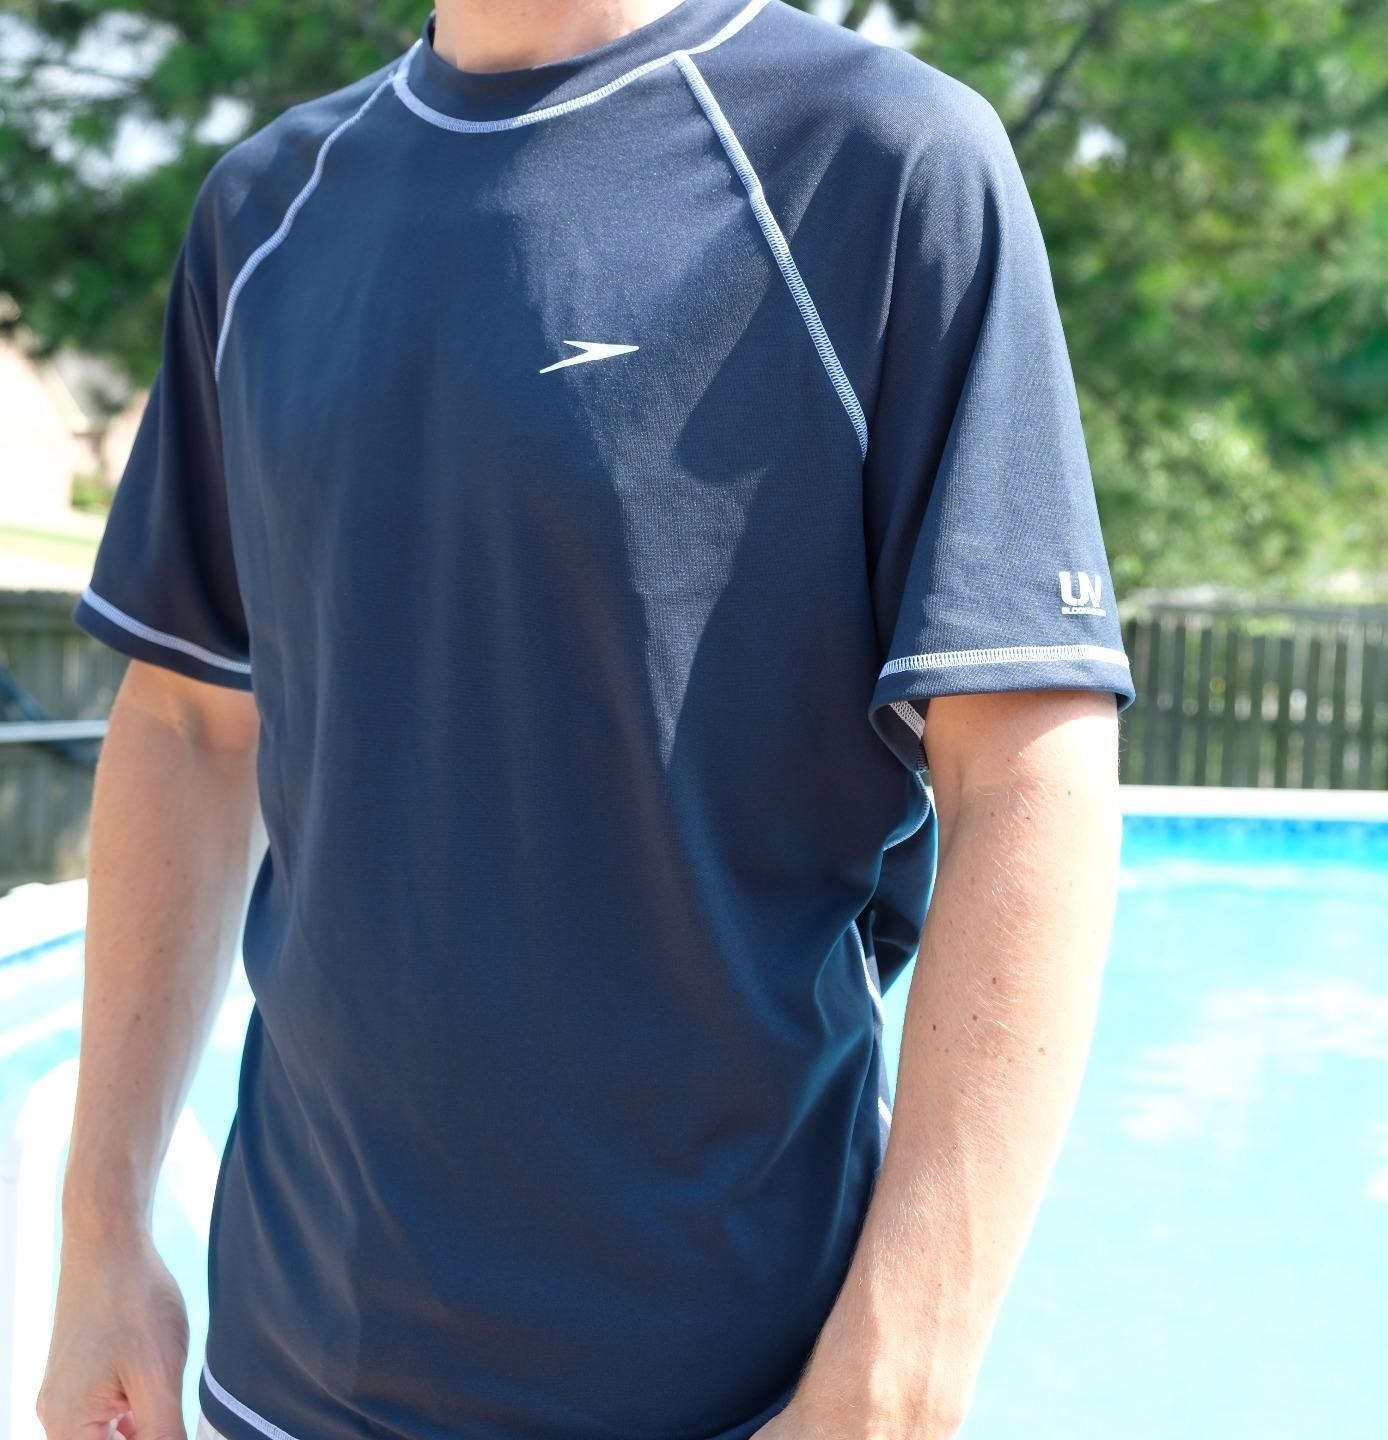 A reviewer wears the shirt in blue